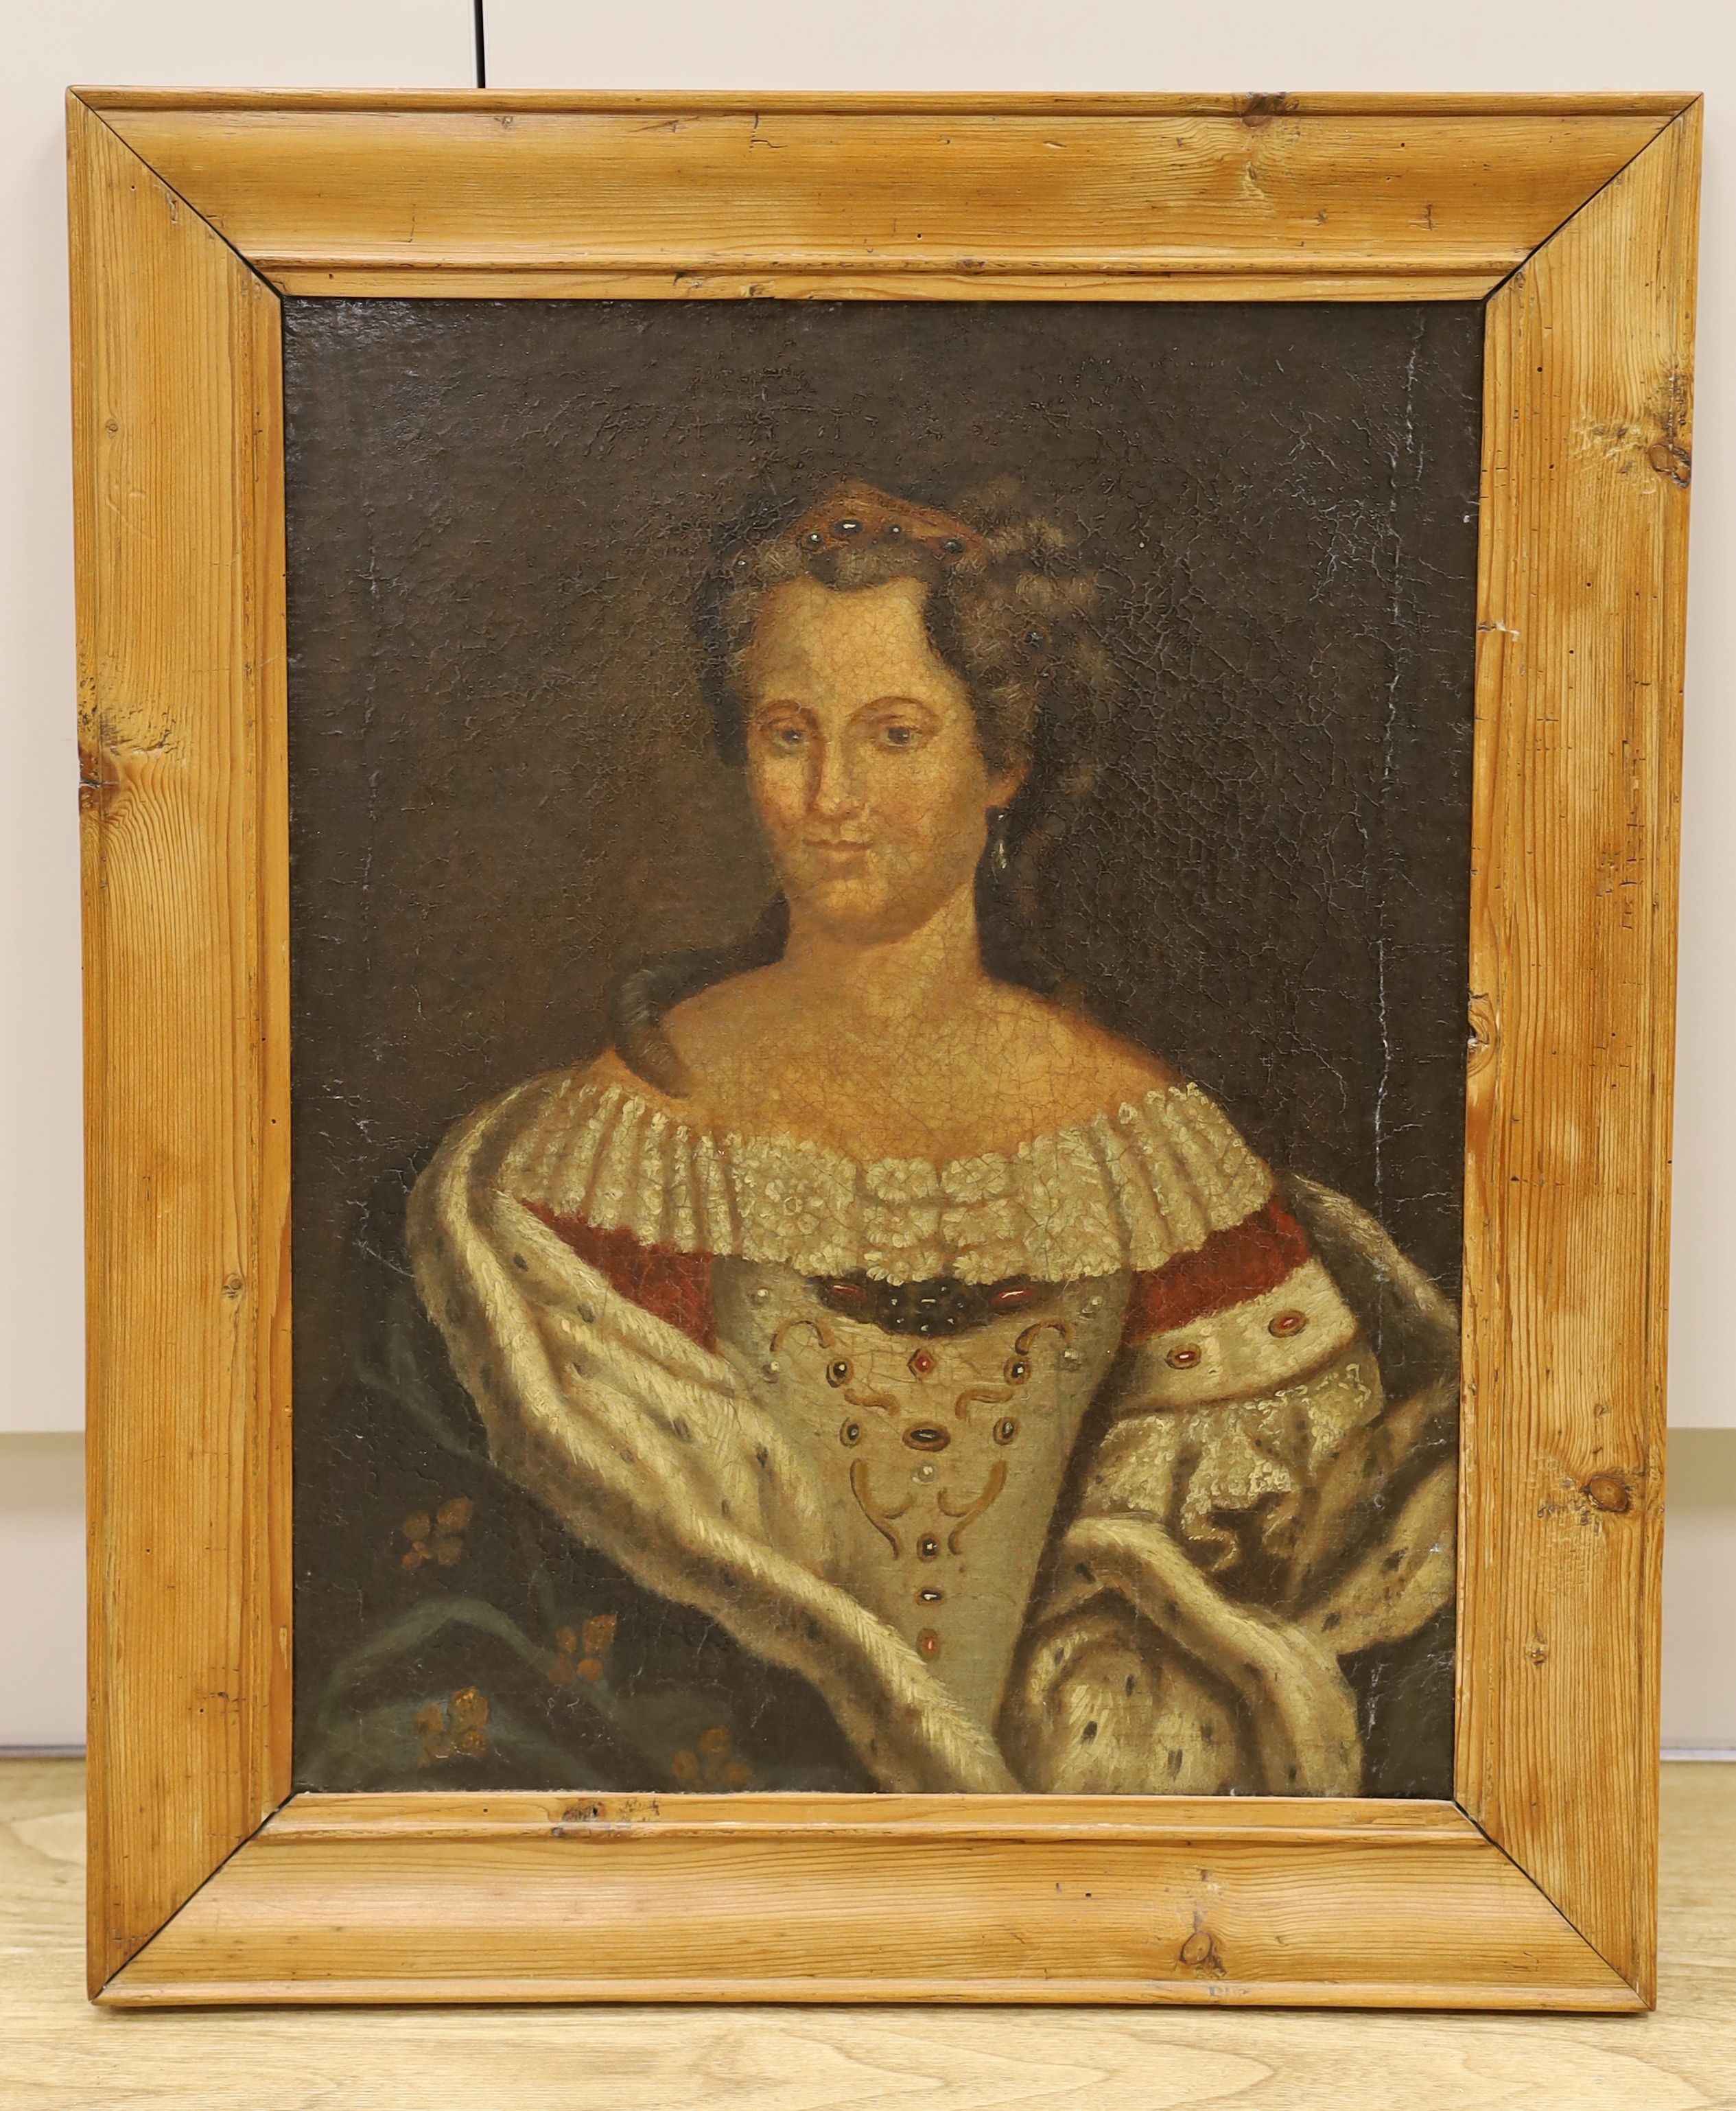 Late 18th century English School, oil on canvas, Portrait of a noblewoman, 49 x 38cm - Image 2 of 3